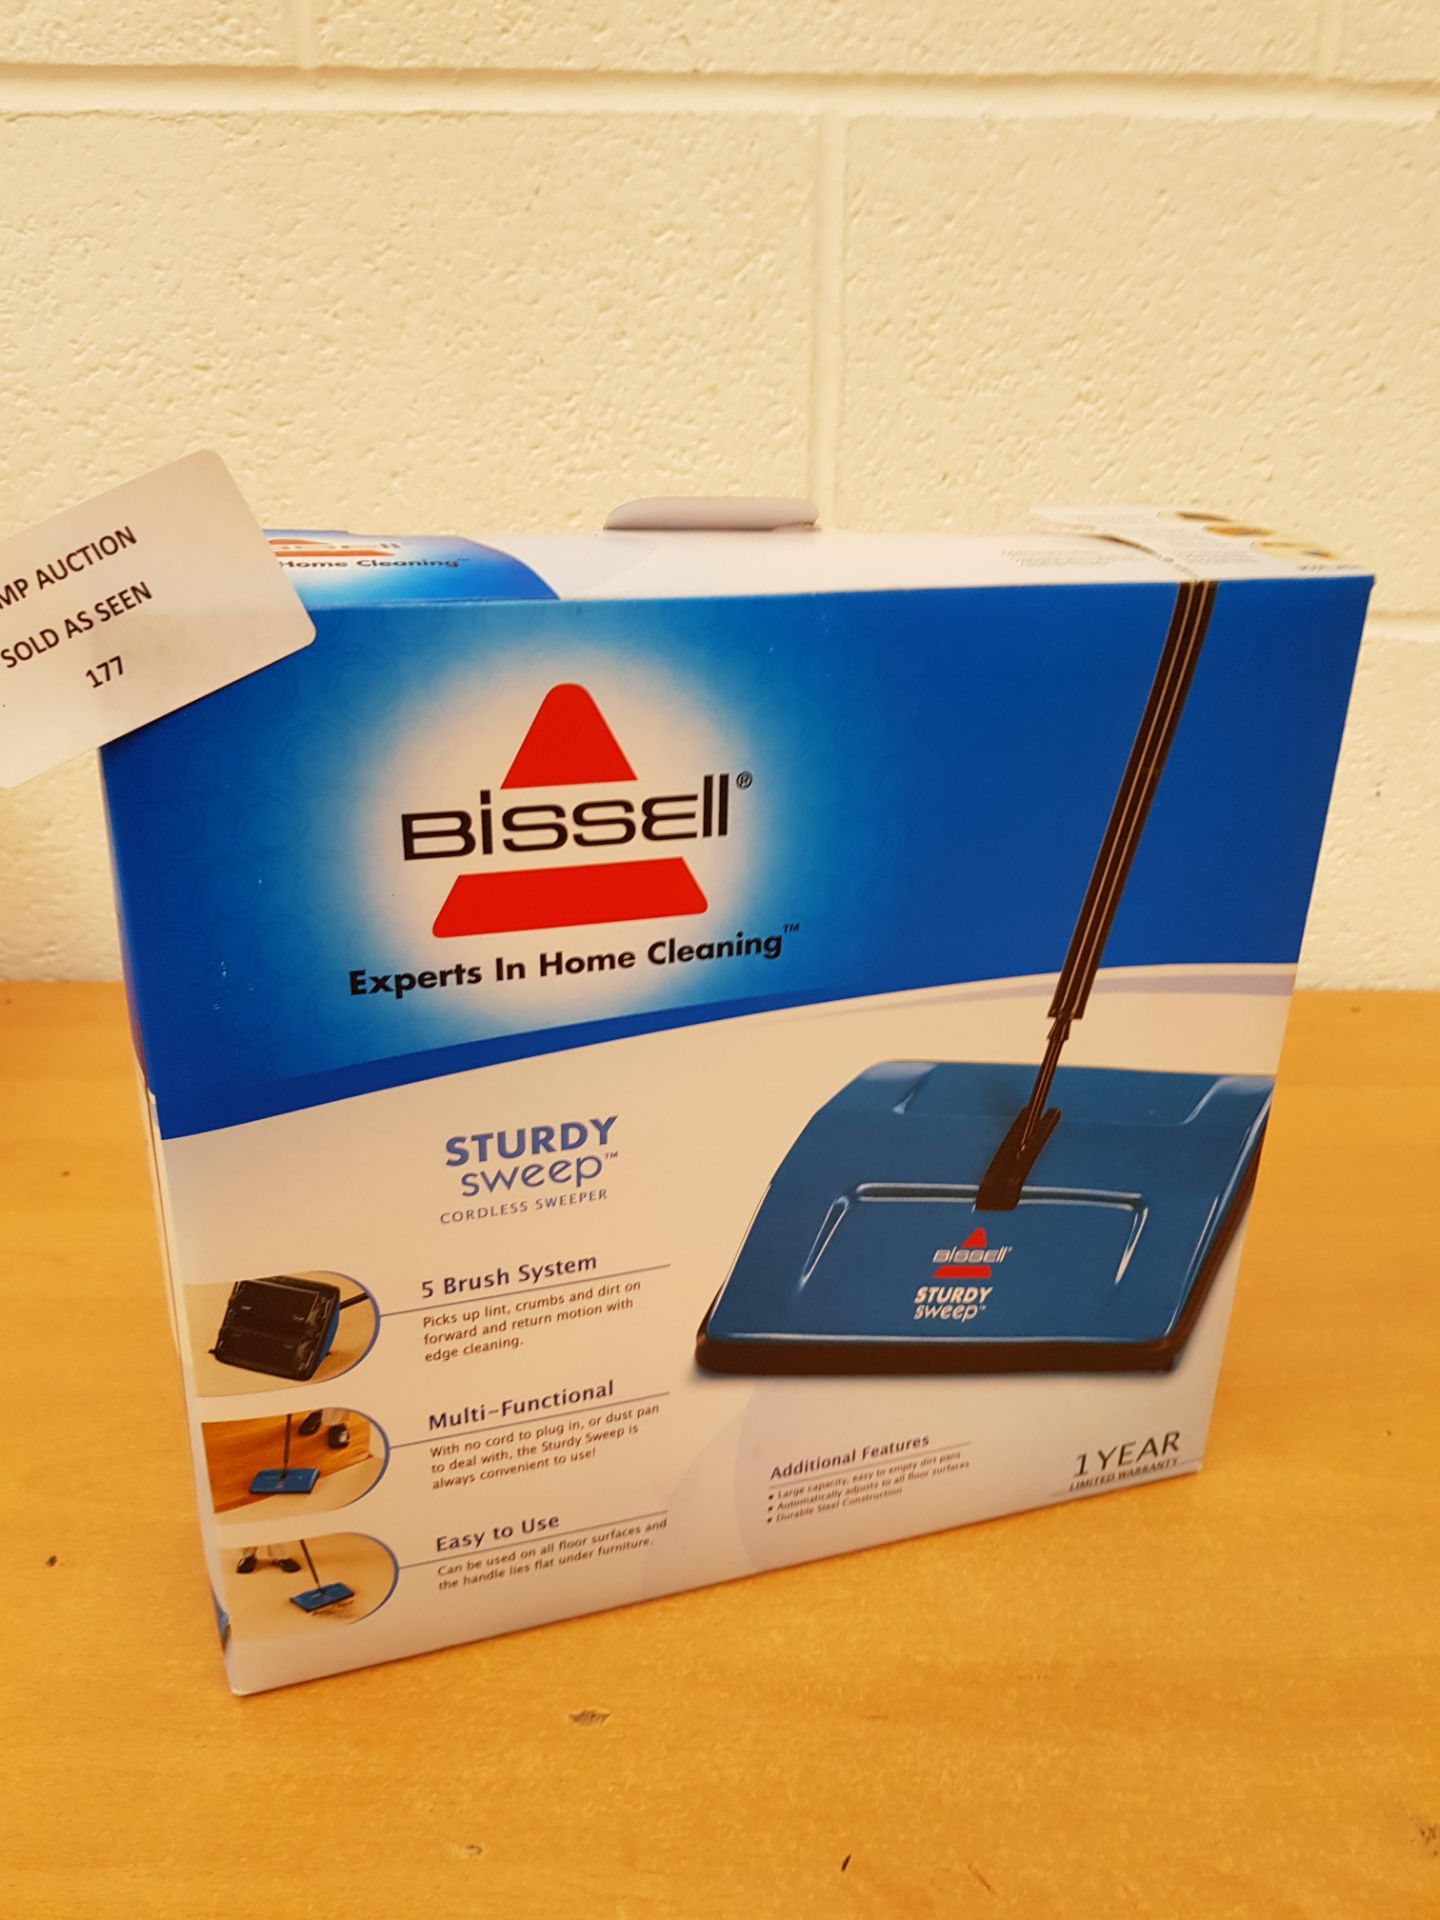 BISSELL 2402E Sturdy Sweep Floor Cleaner